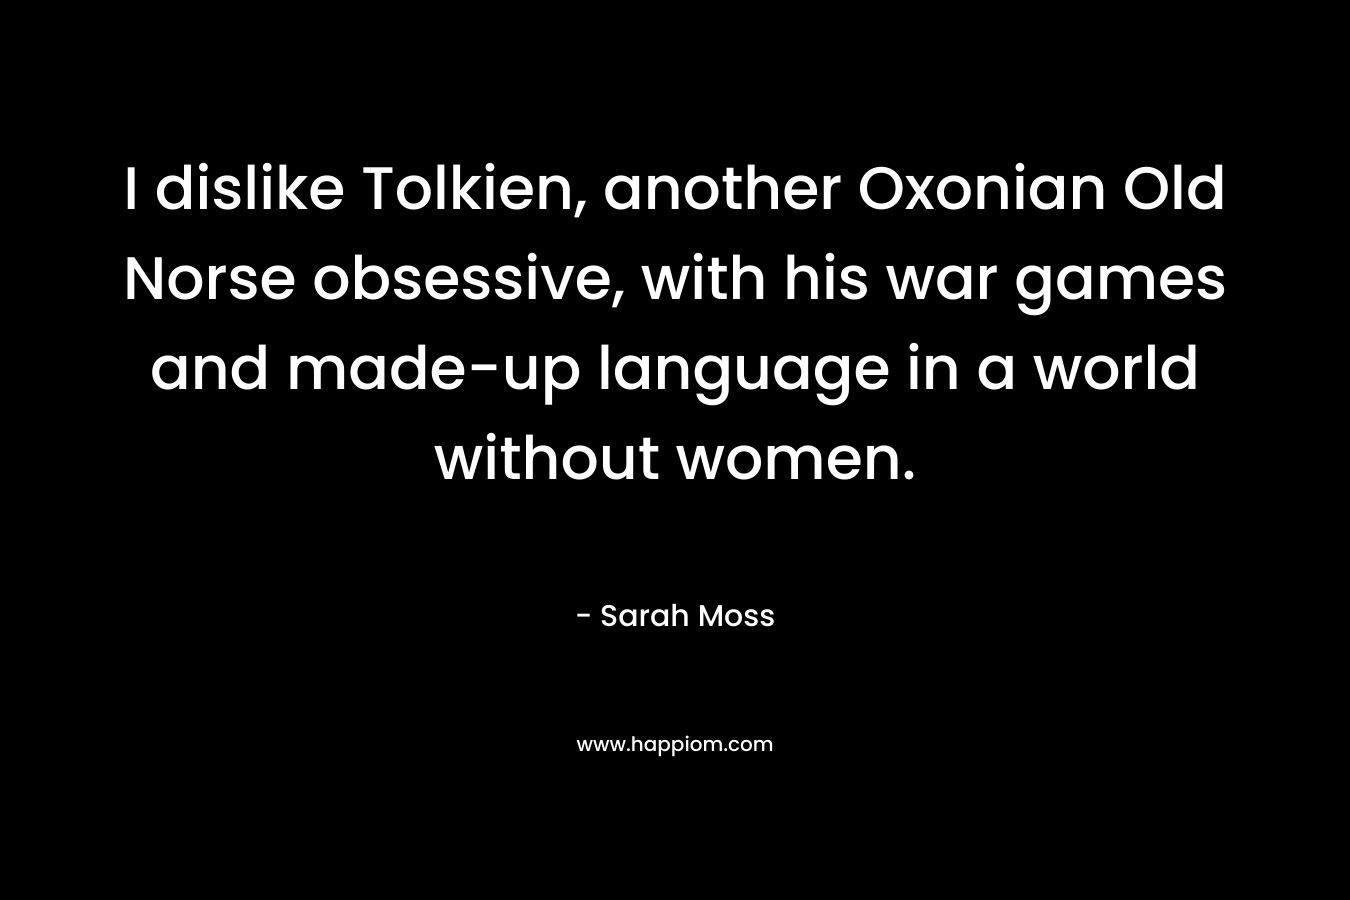 I dislike Tolkien, another Oxonian Old Norse obsessive, with his war games and made-up language in a world without women.